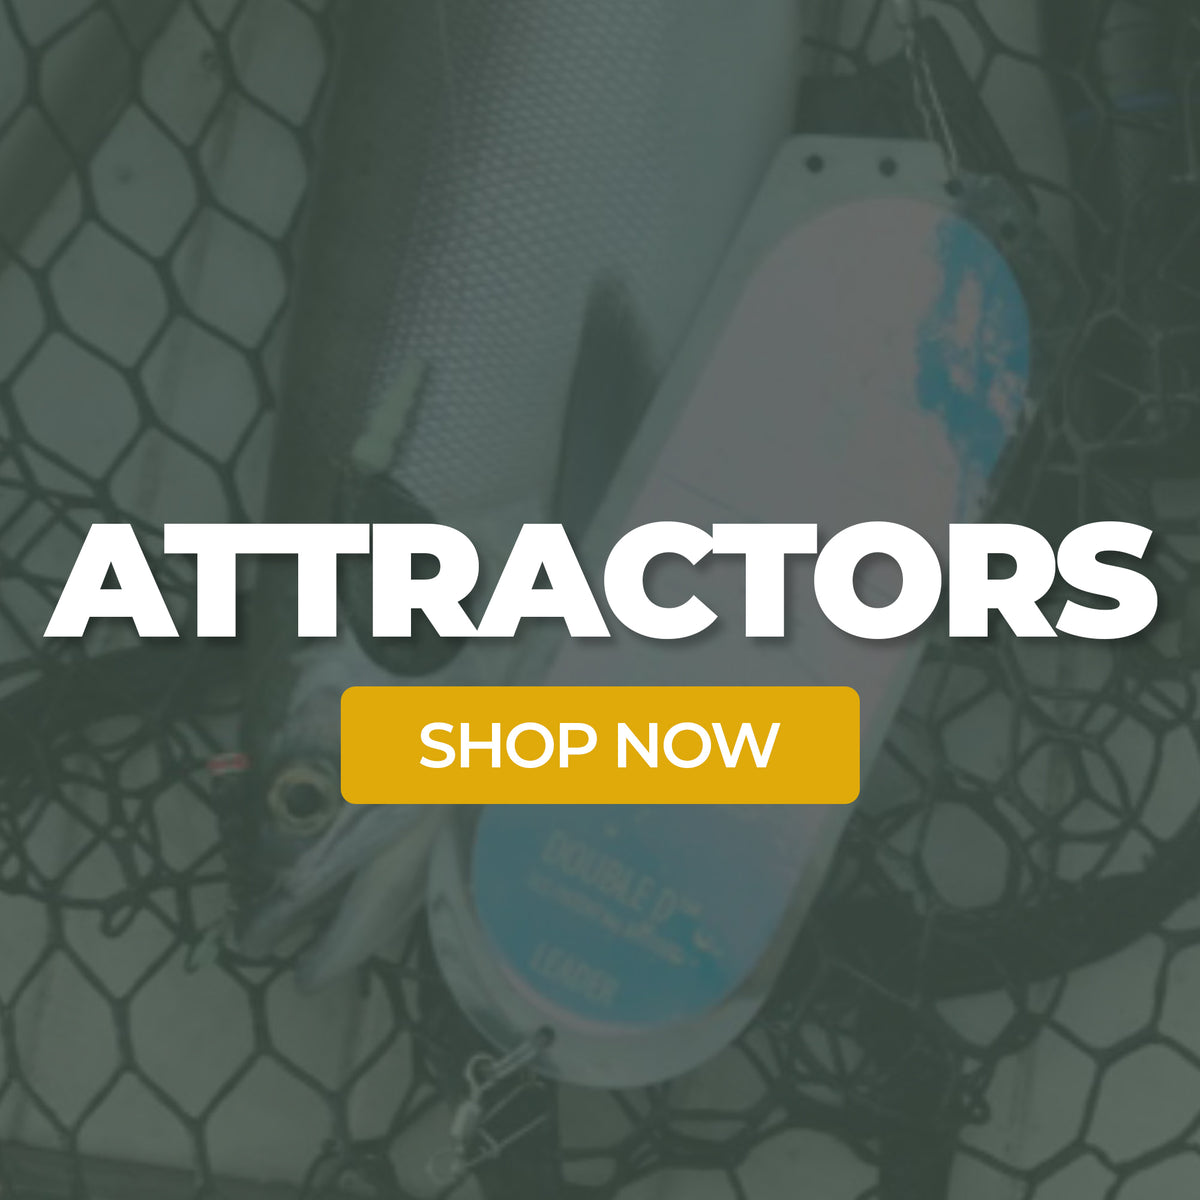 1 Trolling Attractor on the Market - Double D Dodger — Mack's Lure